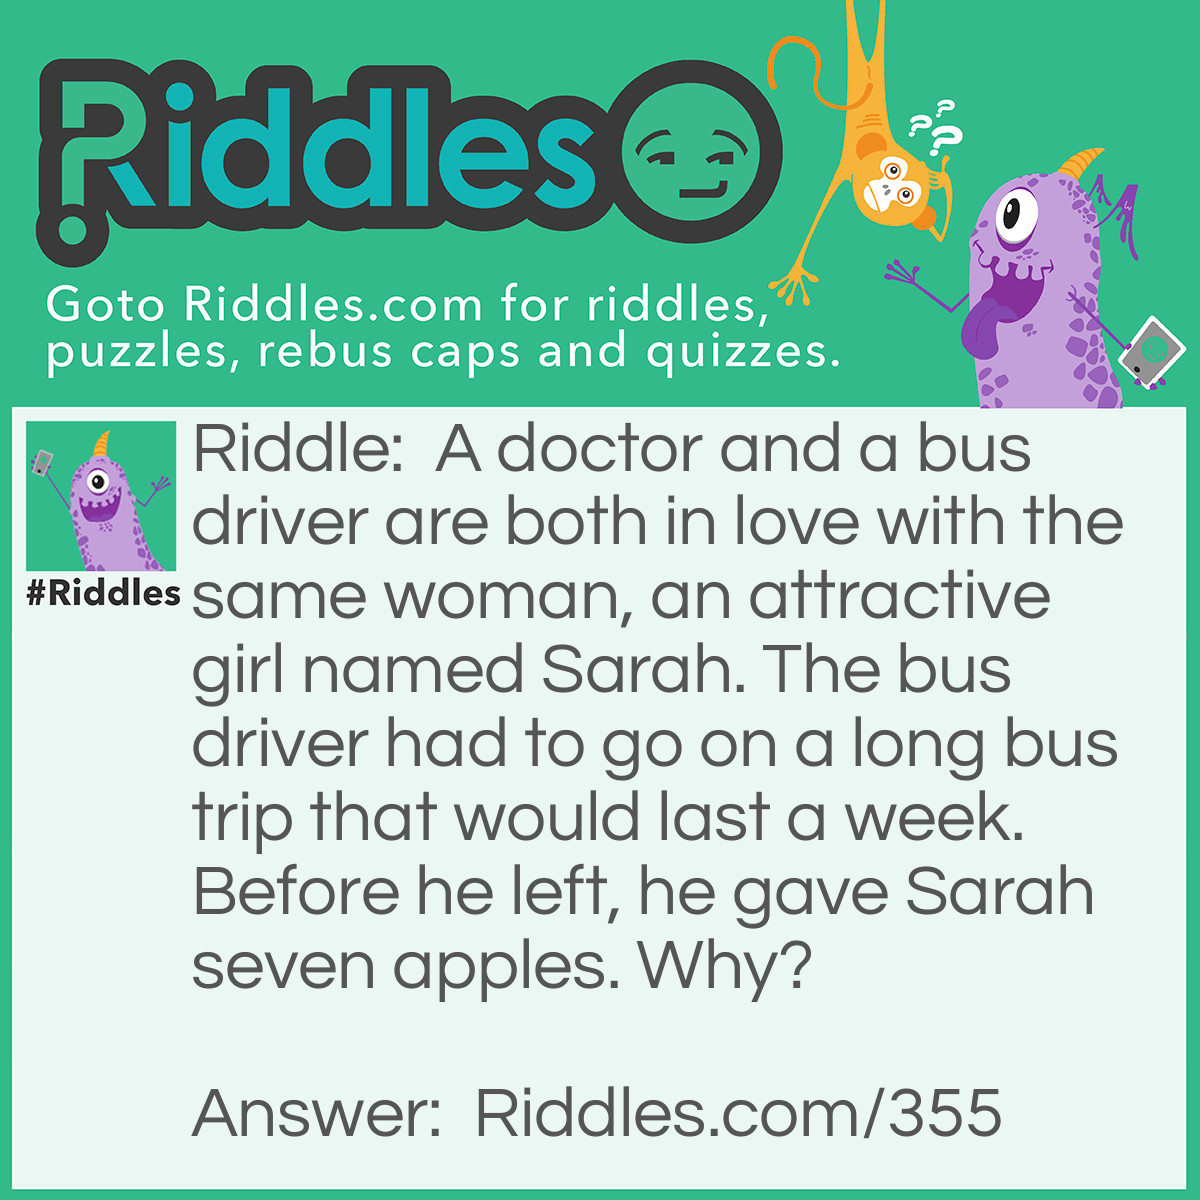 Riddle: A doctor and a bus driver are both in love with the same woman, an attractive girl named Sarah. The bus driver had to go on a long bus trip that would last a week. Before he left, he gave Sarah seven apples. Why? Answer: An apple a day keeps the doctor away!